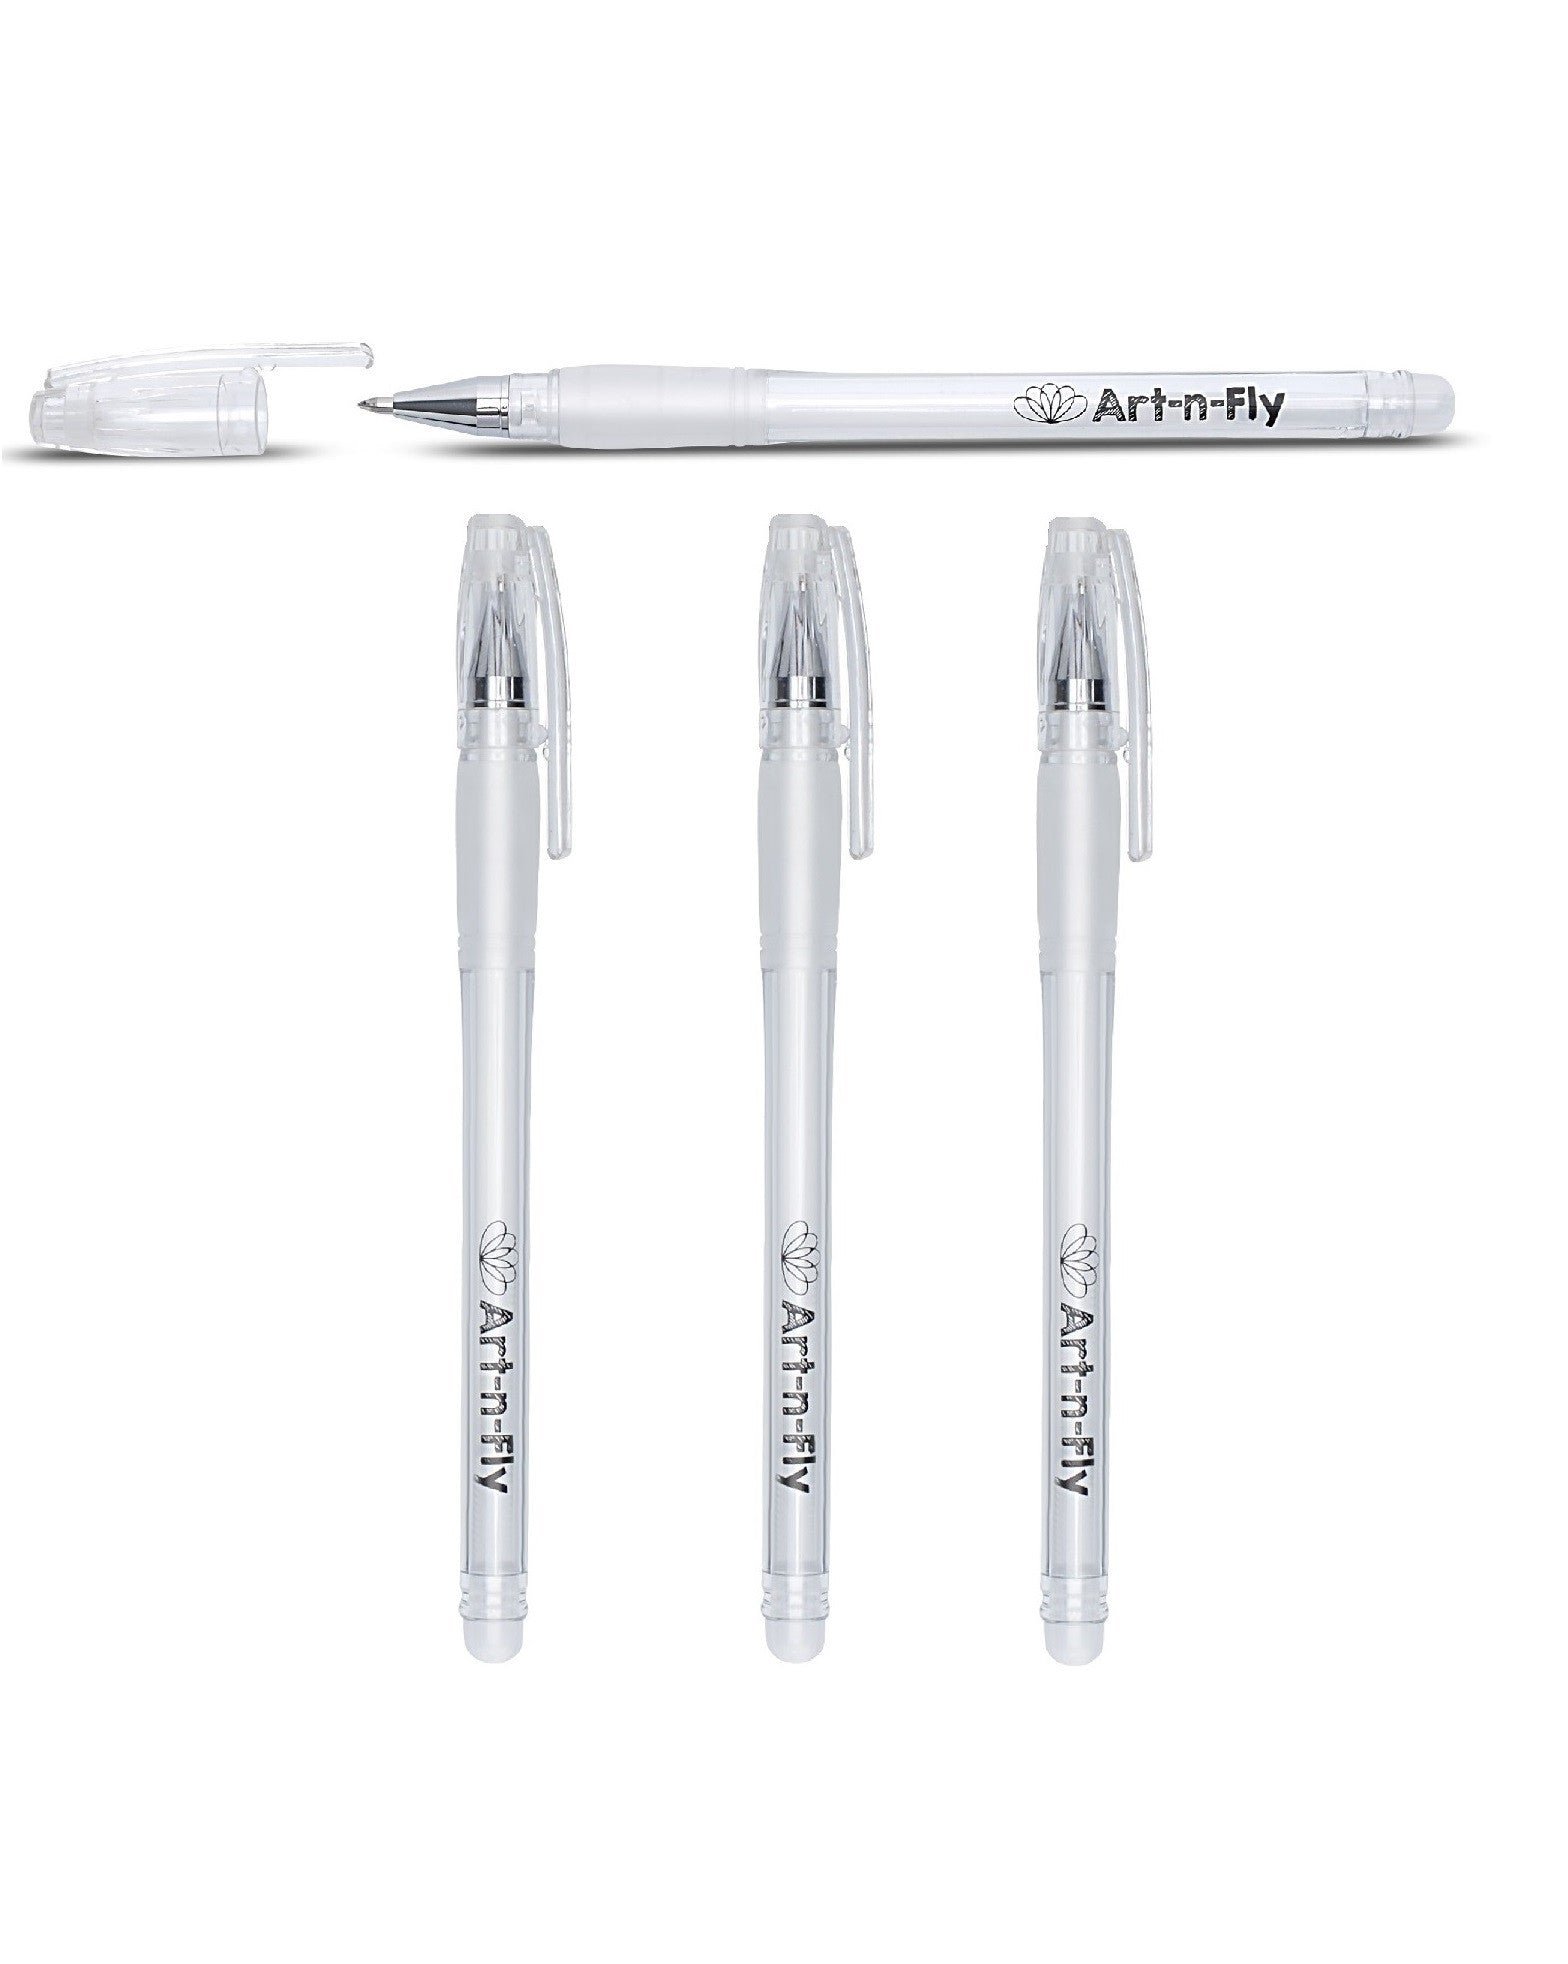 Art-n-Fly Ultra Fine Tip 003 Black Inking Pens Three Pack with